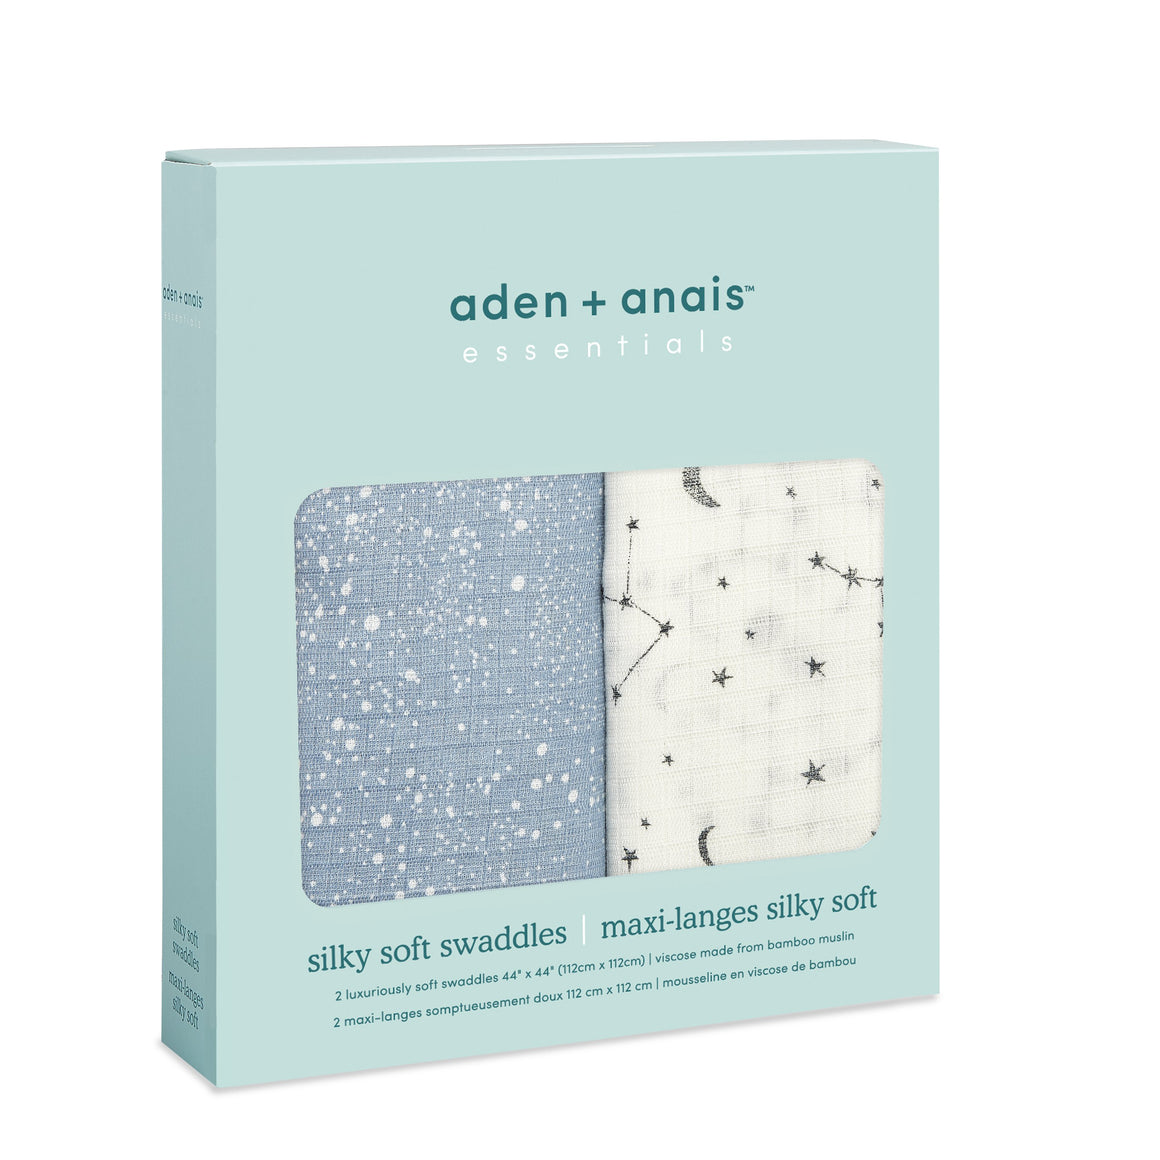 aden+anais essentials cosmic 2 pack bamboo silky soft swaddles